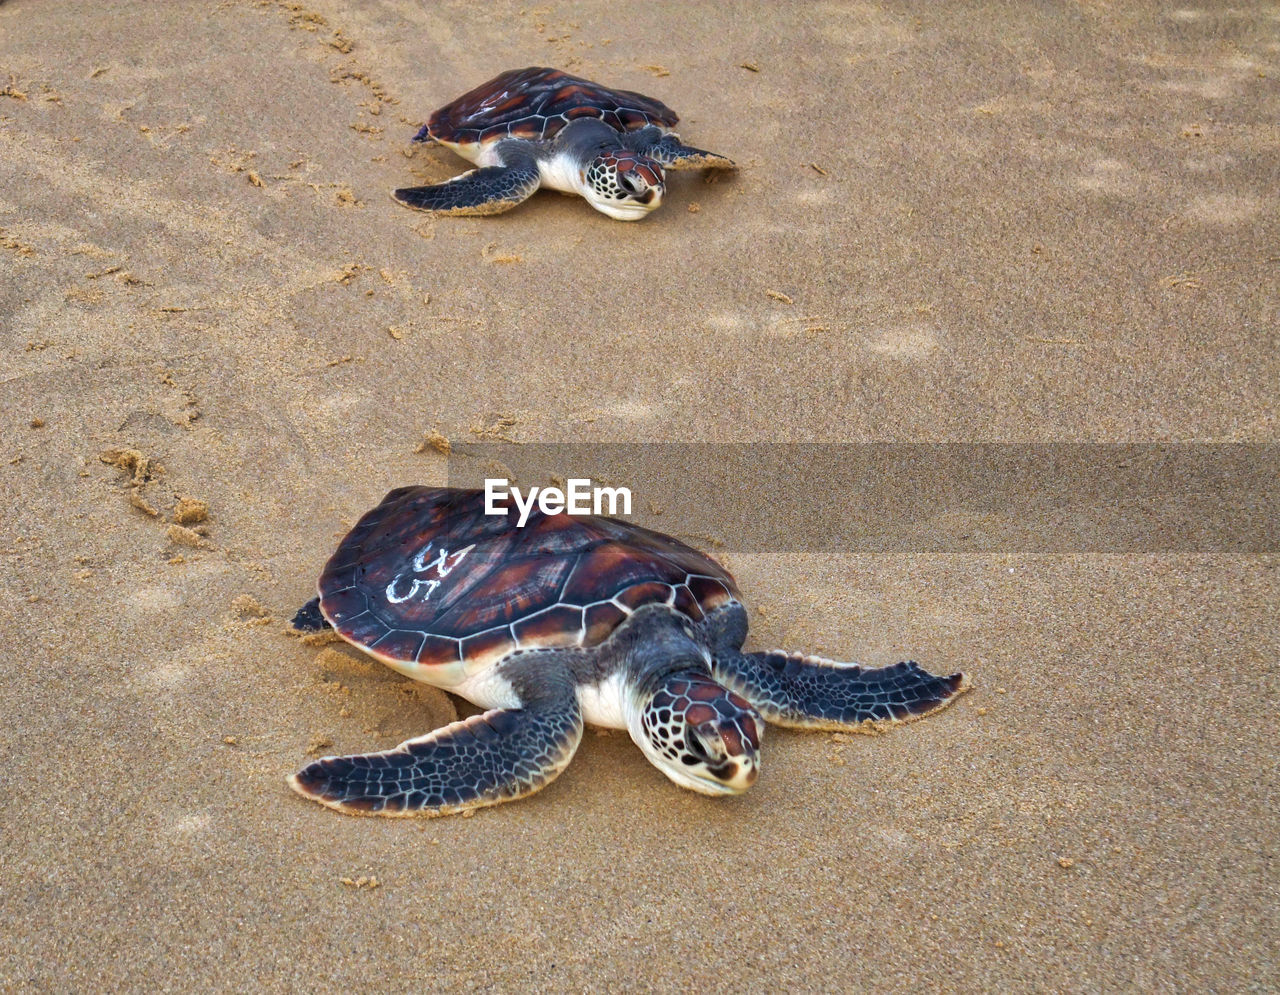 HIGH ANGLE VIEW OF A TURTLE ON SAND